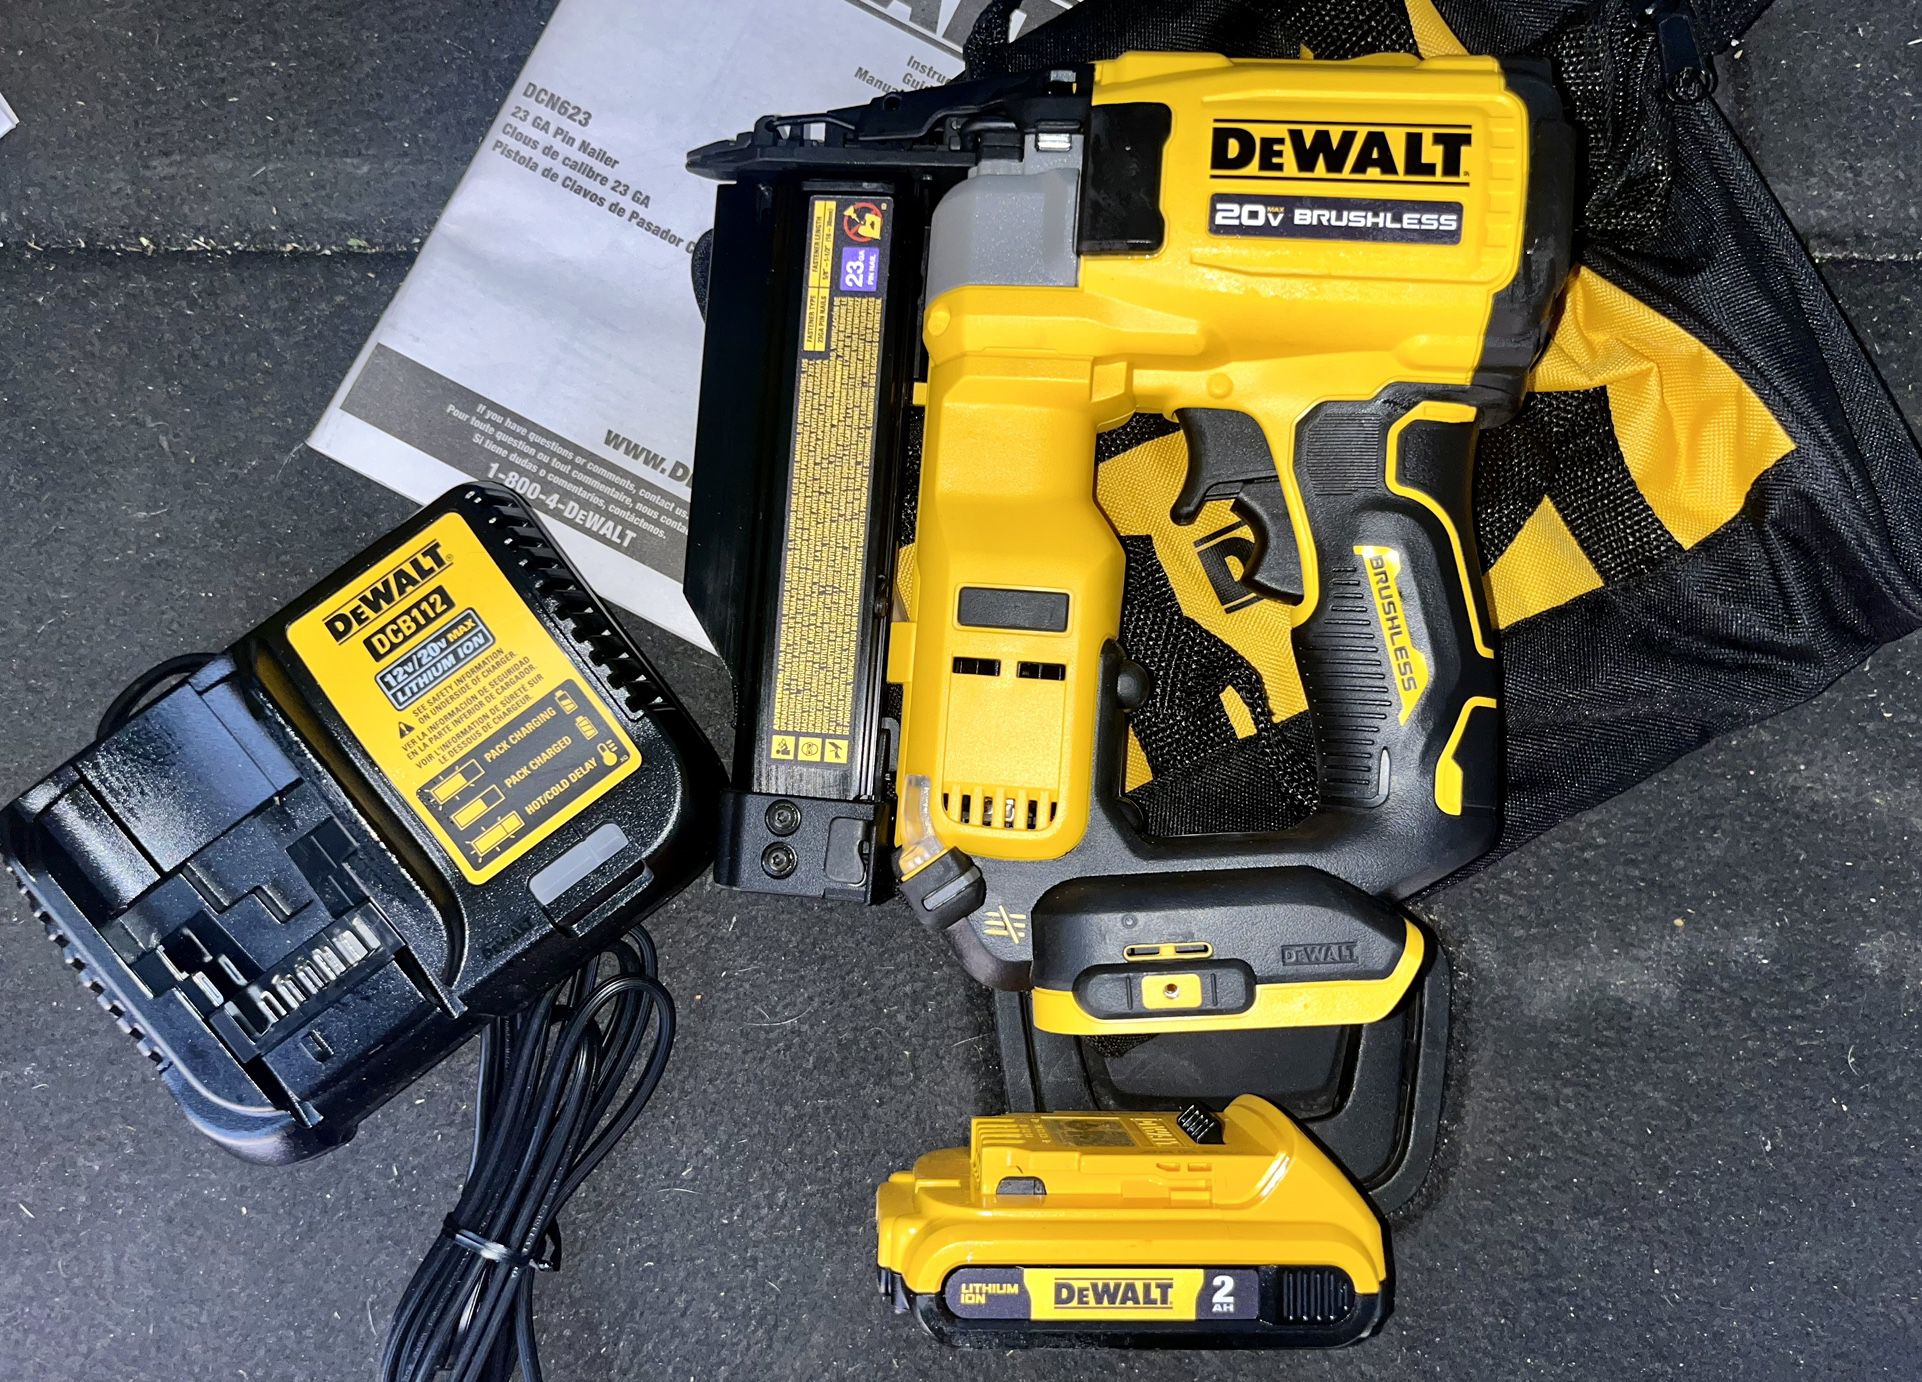 DEWALT ATOMIC 20V MAX Lithium Ion Cordless 23 Gauge Pin Nailer Kit with 2.0Ah Battery and Charger